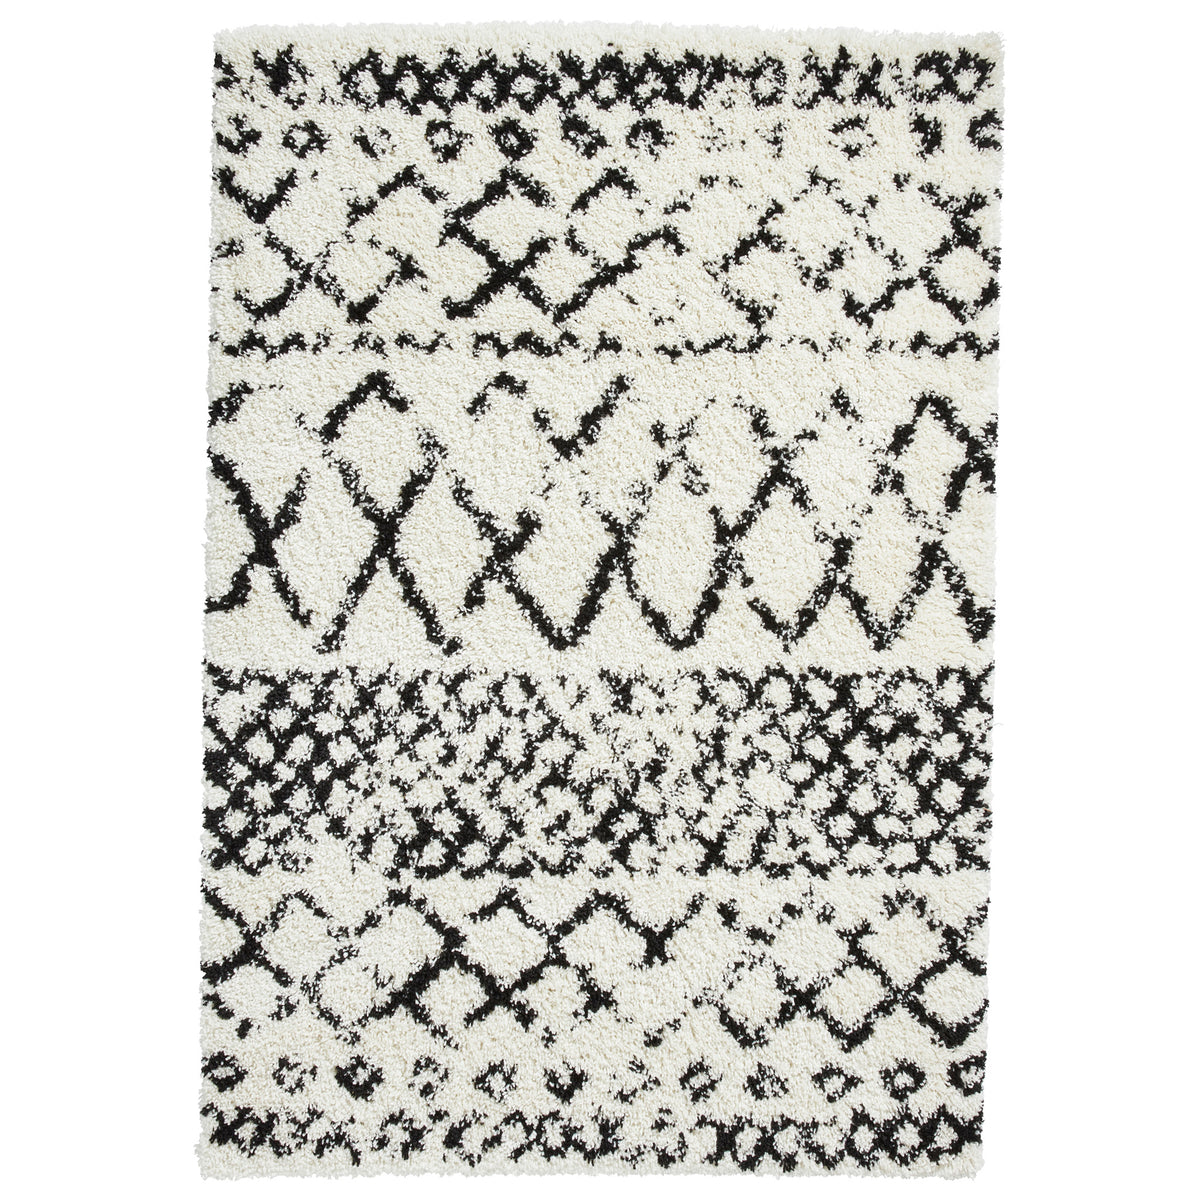 Durham Berber Abstract Shaggy Rug from Roseland Furniture